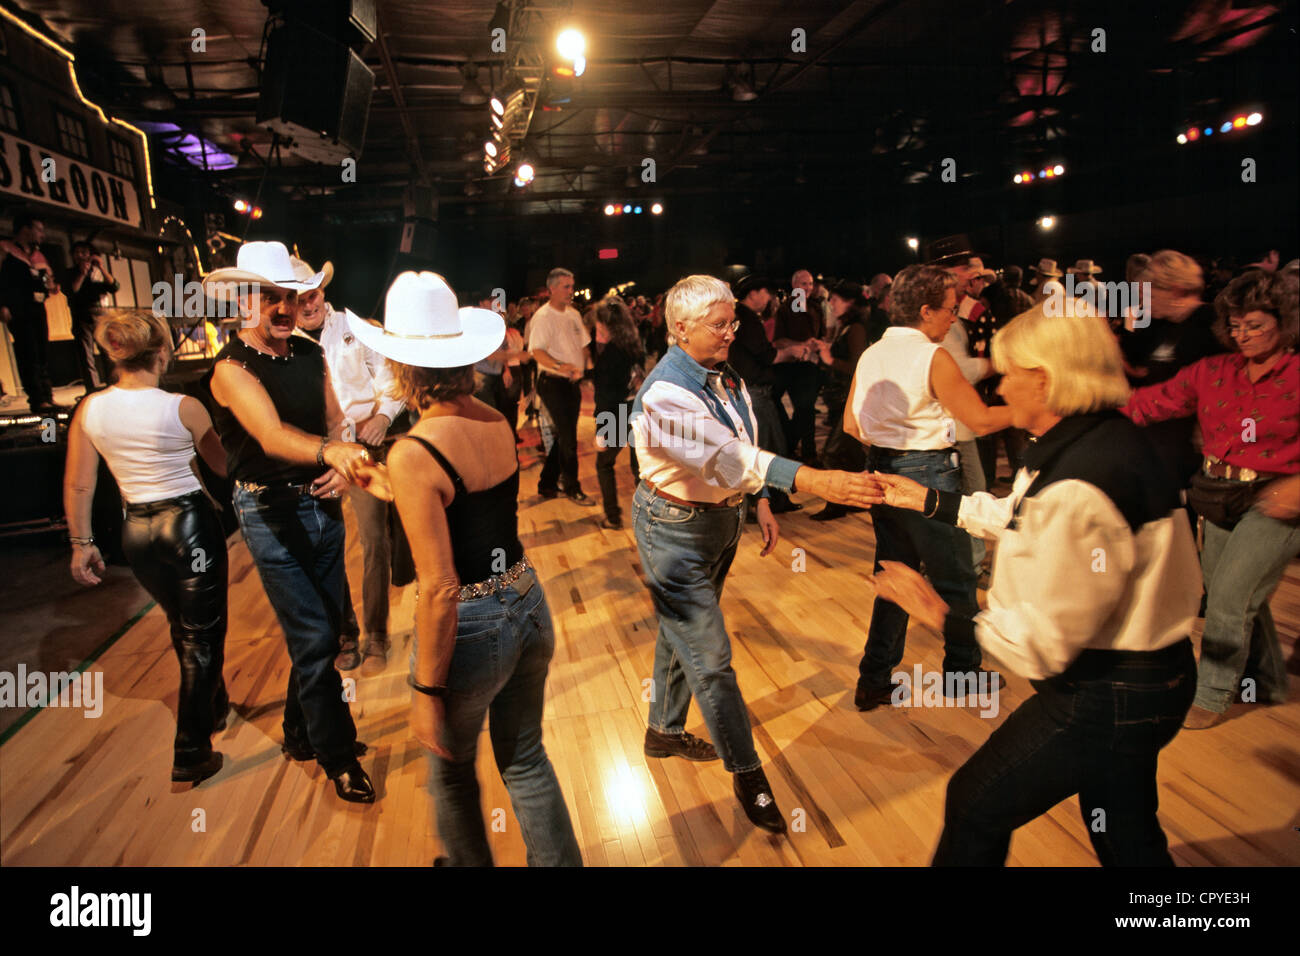 Canada, Quebec Province, Saint Tite, Western Festival, Line Dance lesson in the Grand Hall Stock Photo